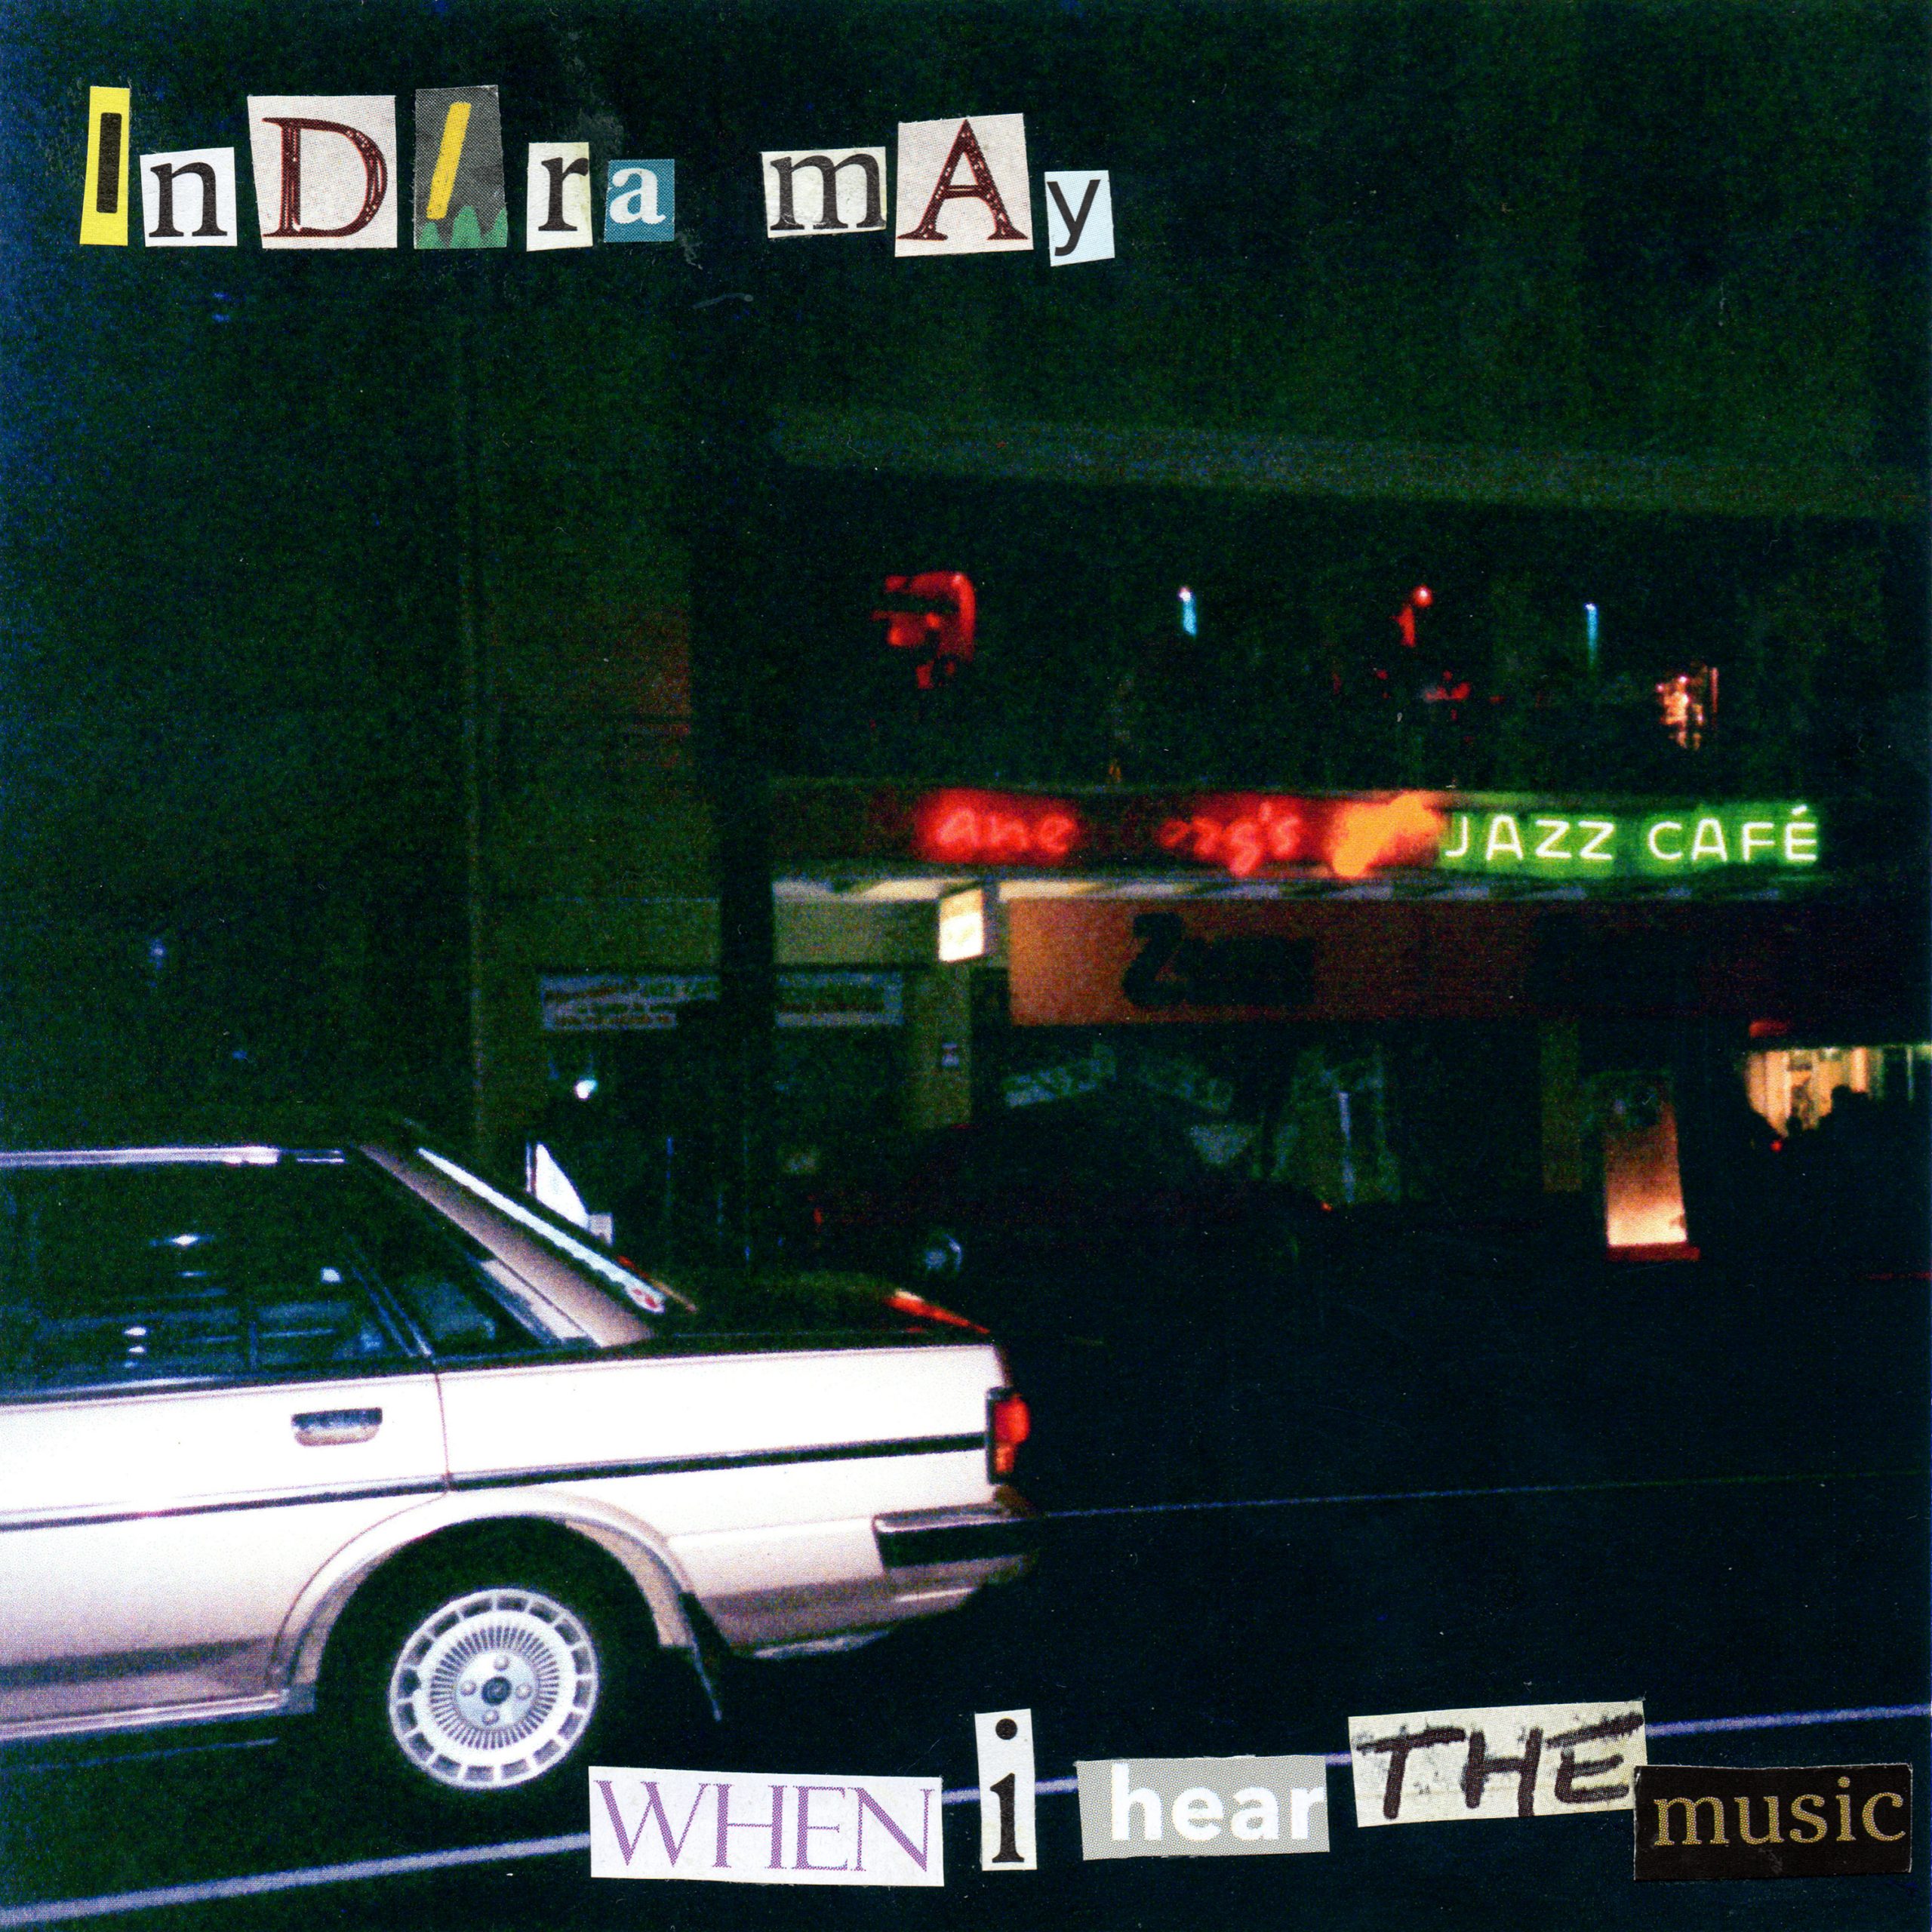 Stereo Embers’ TRACK OF THE DAY: Indira May’s “When I Hear The Music”